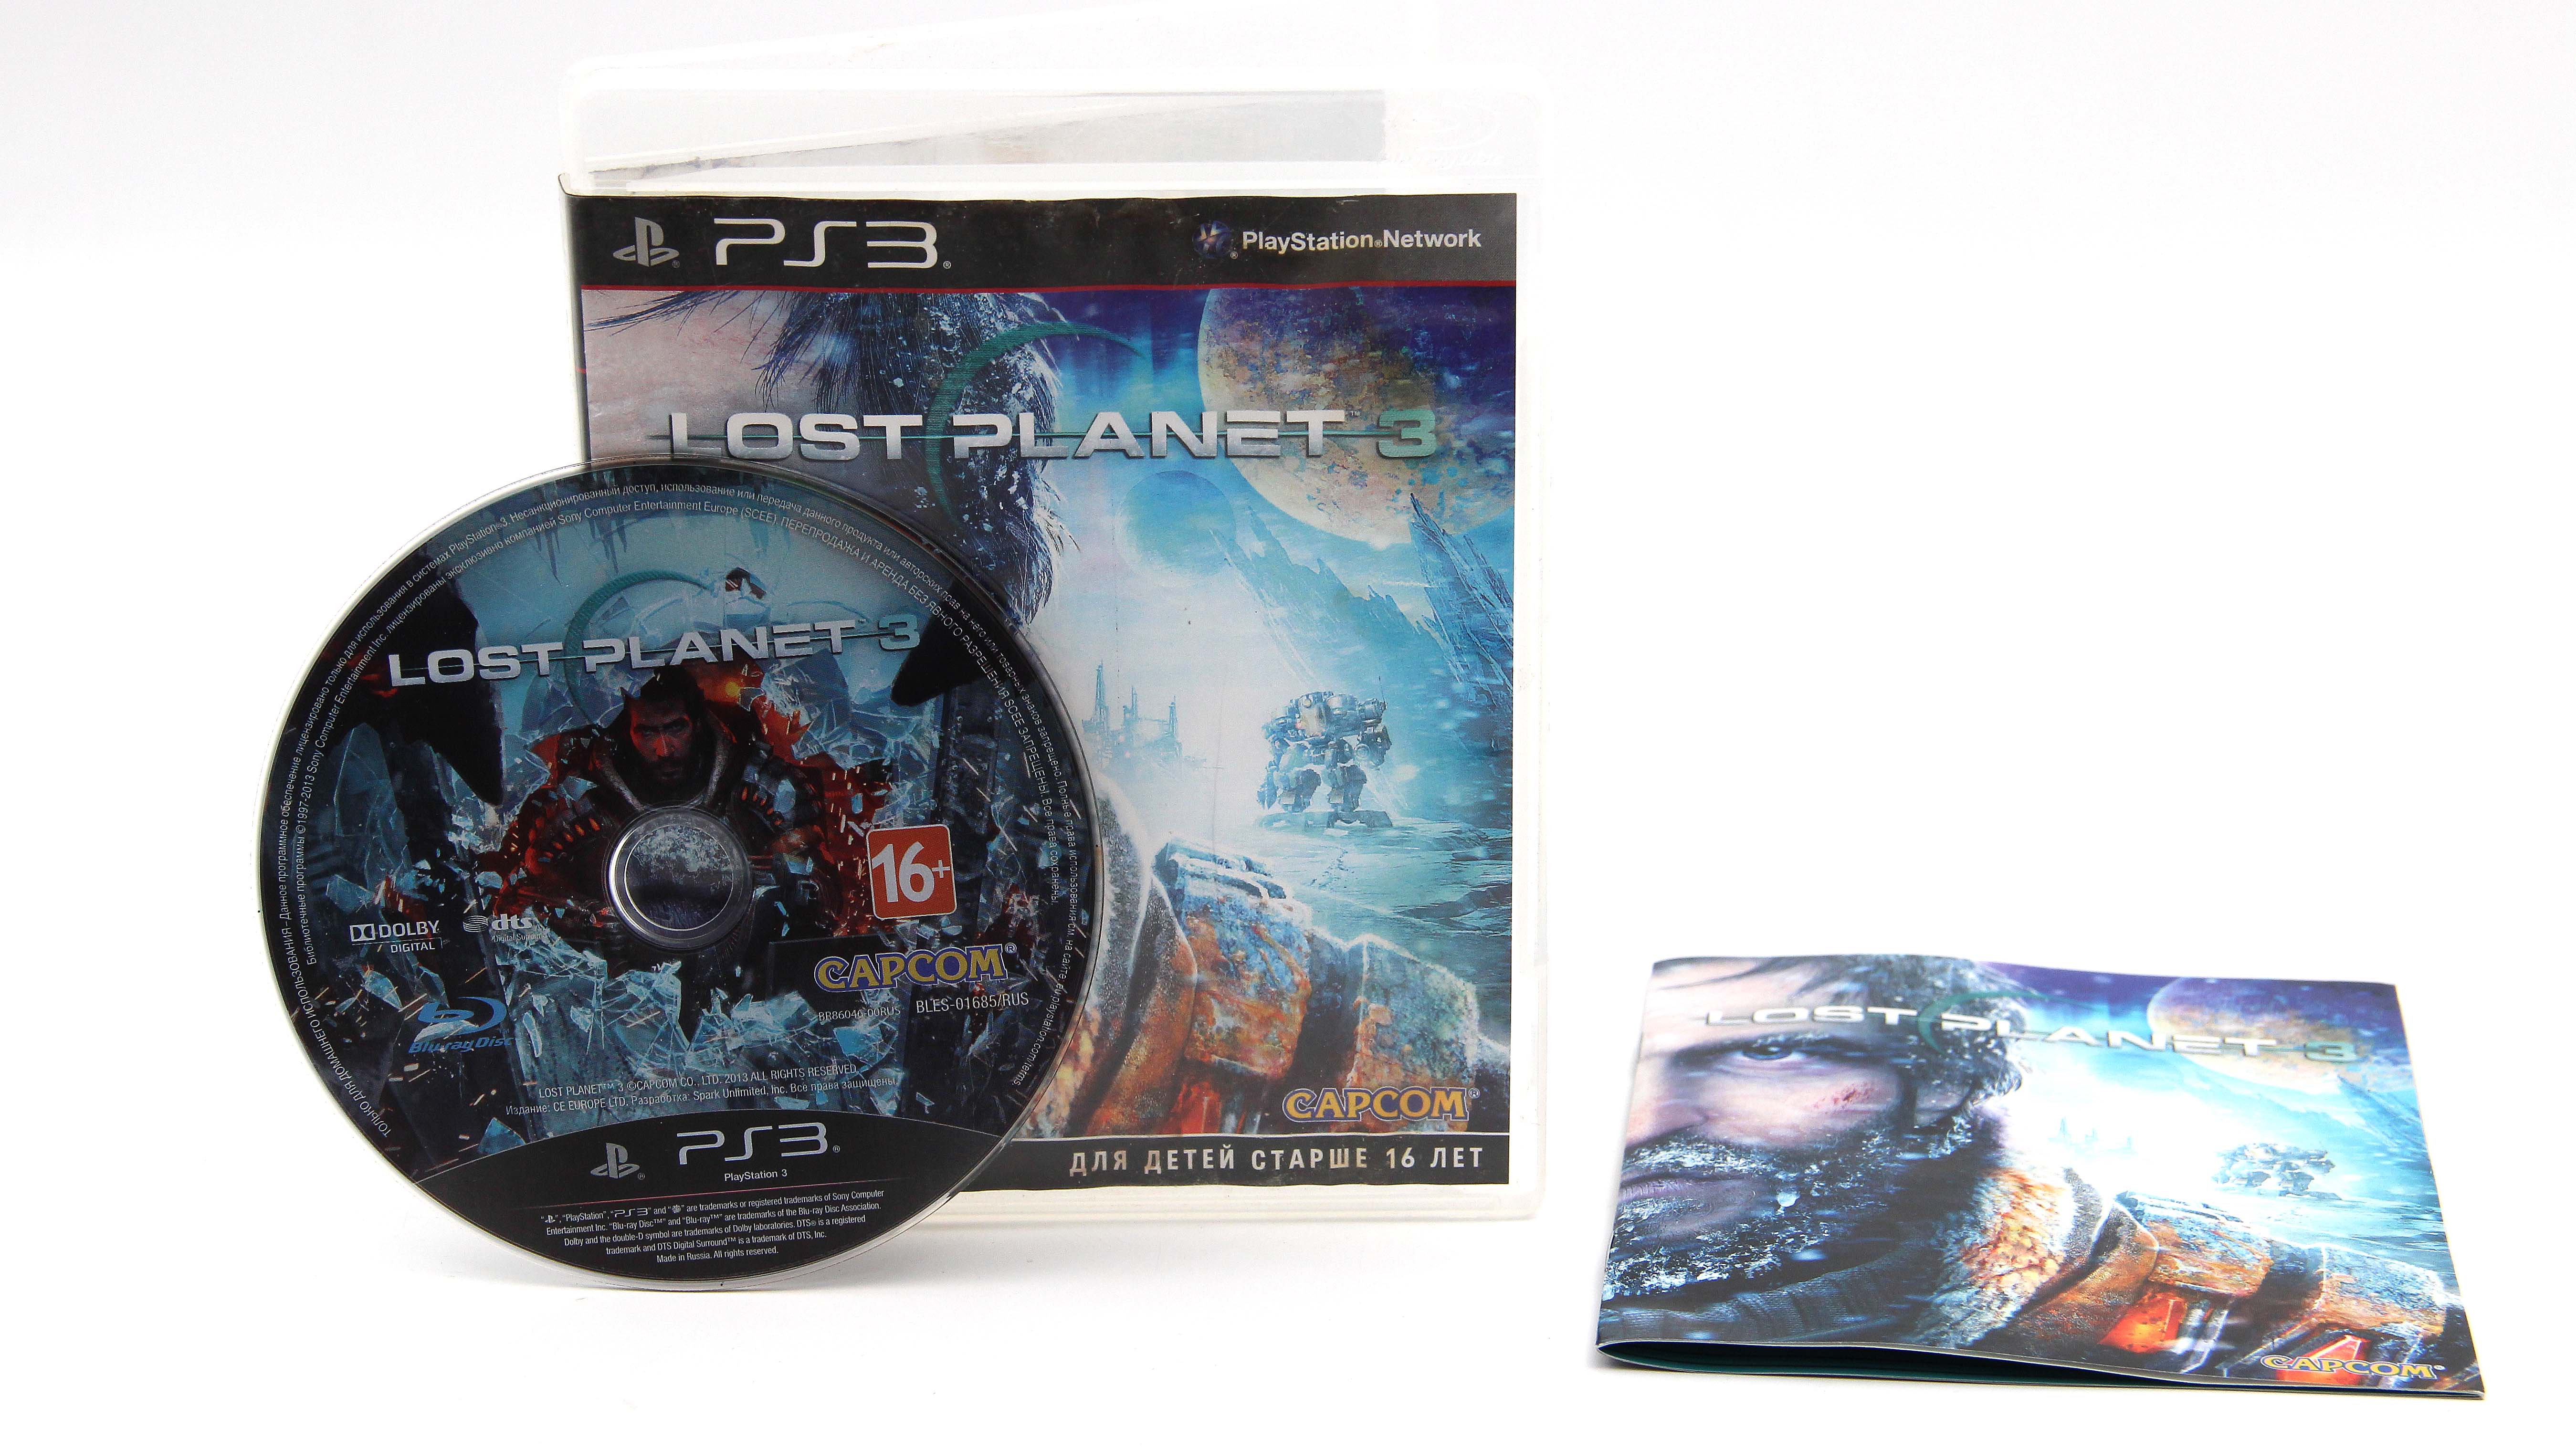 Lost planet ps3. Игра Lost Planet 3 для ps3. Lost Planet 3 (ps3). Картинка the Lost Planet 3 YBRT.